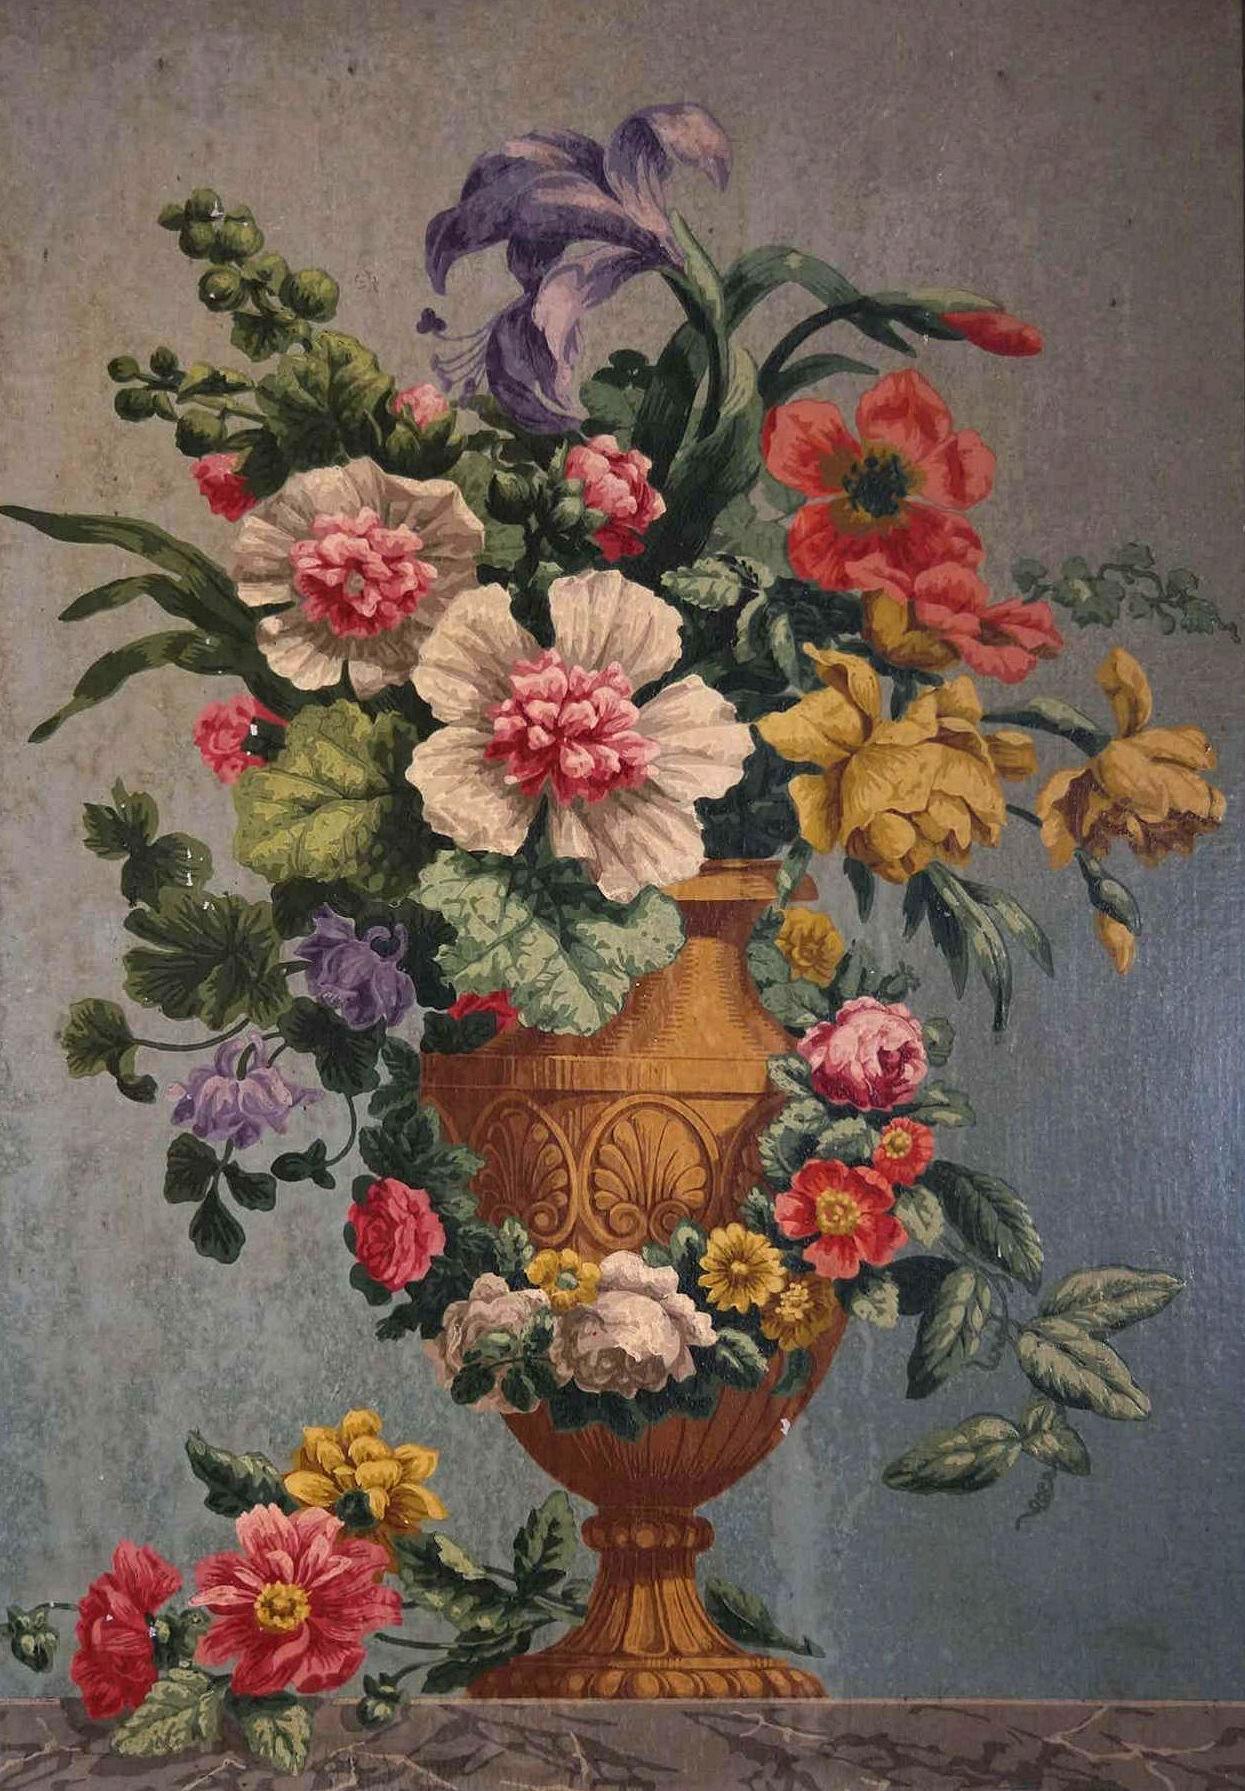 Oil on board painting of still life with flowers in urn.
Apparently unsigned.

Measures: Height 38